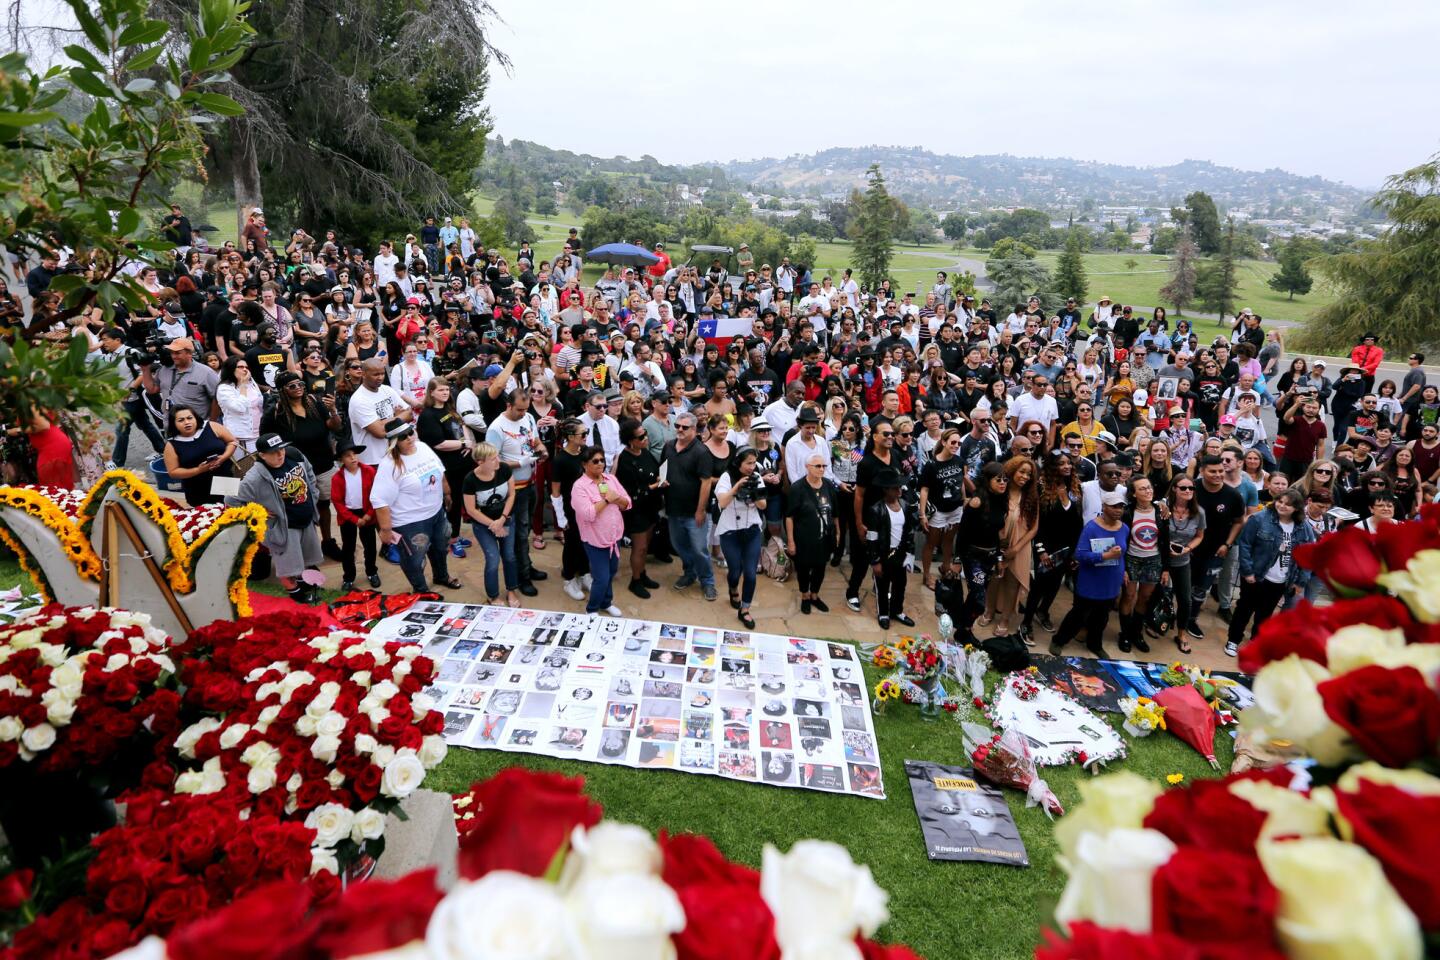 Michael Jackson faithful hold colorful memorial despite latest abuse claims  - Los Angeles Times